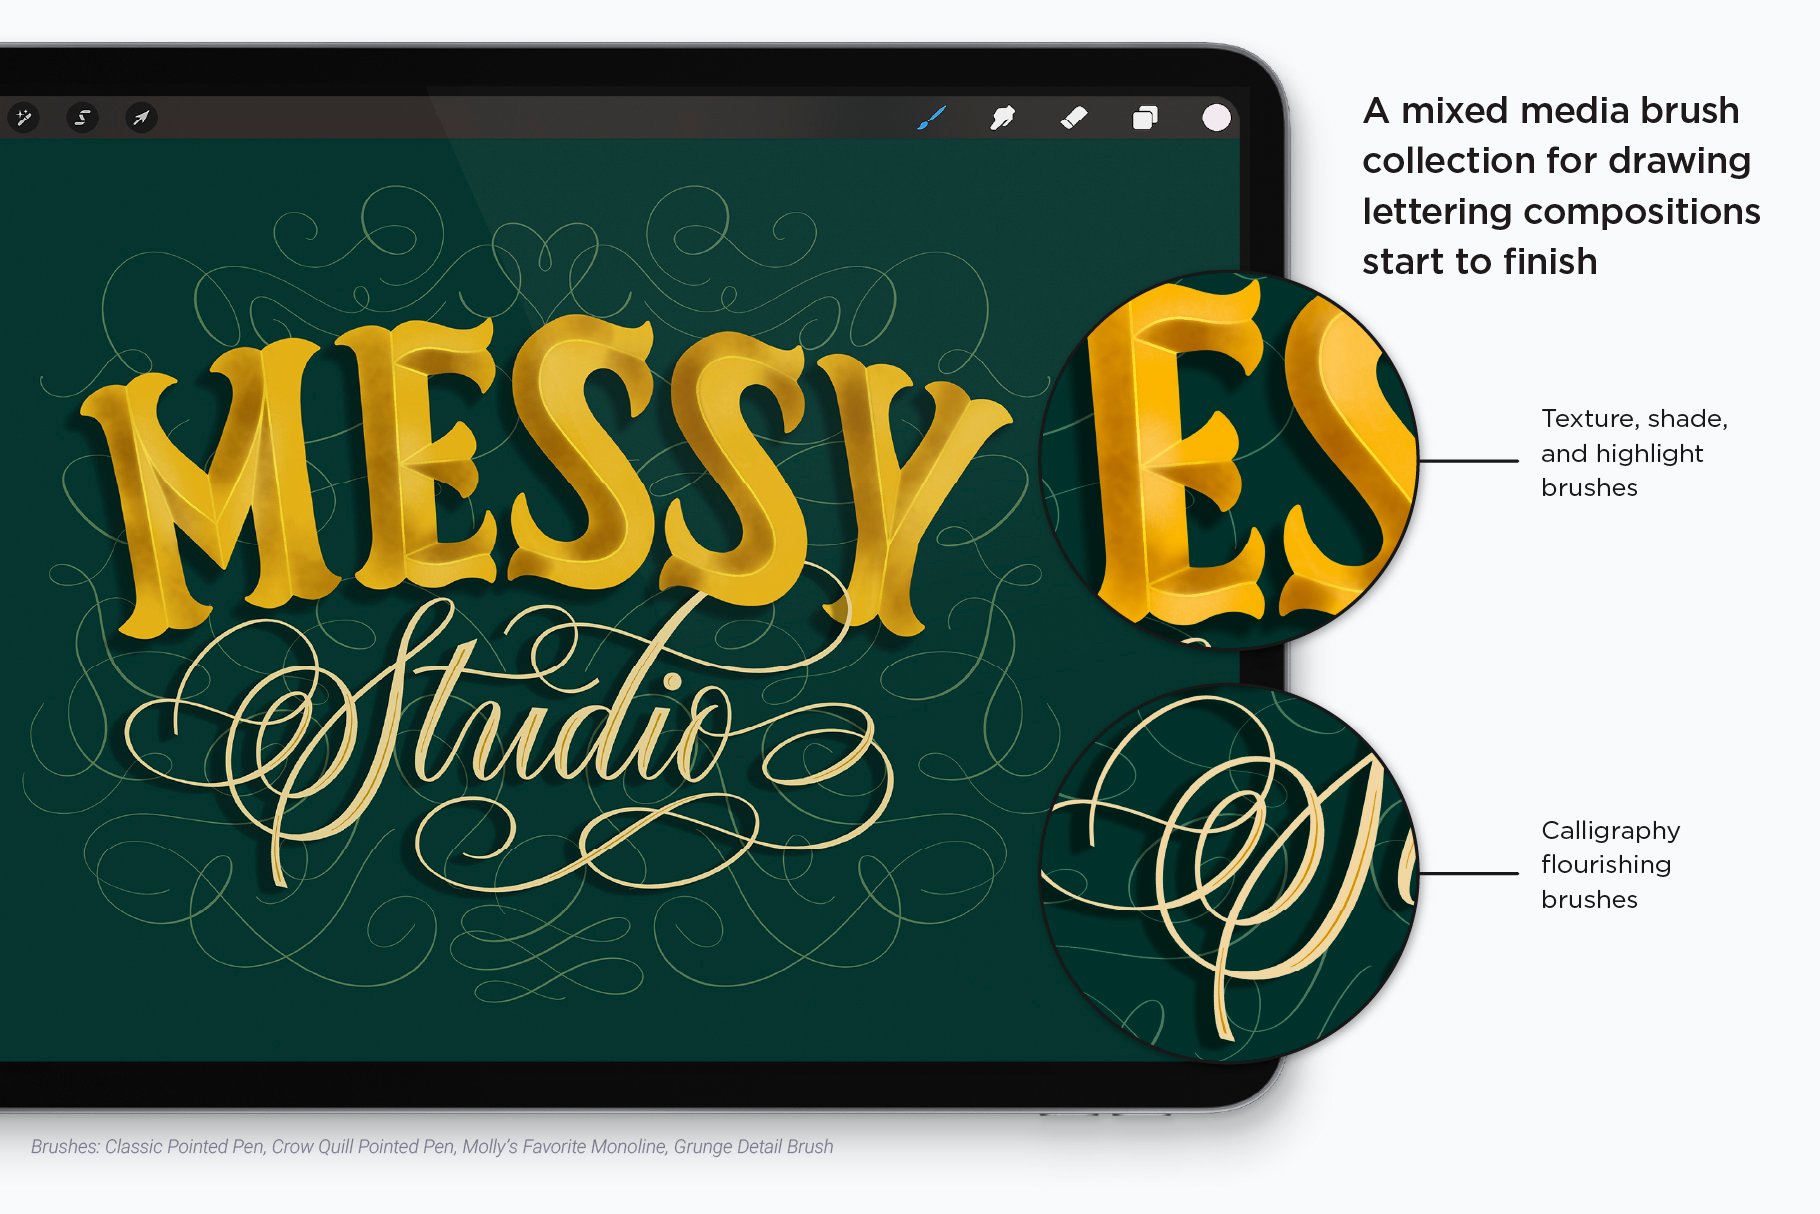 The Ultimate Lettering and Calligraphy Procreate Kit - Design Cuts